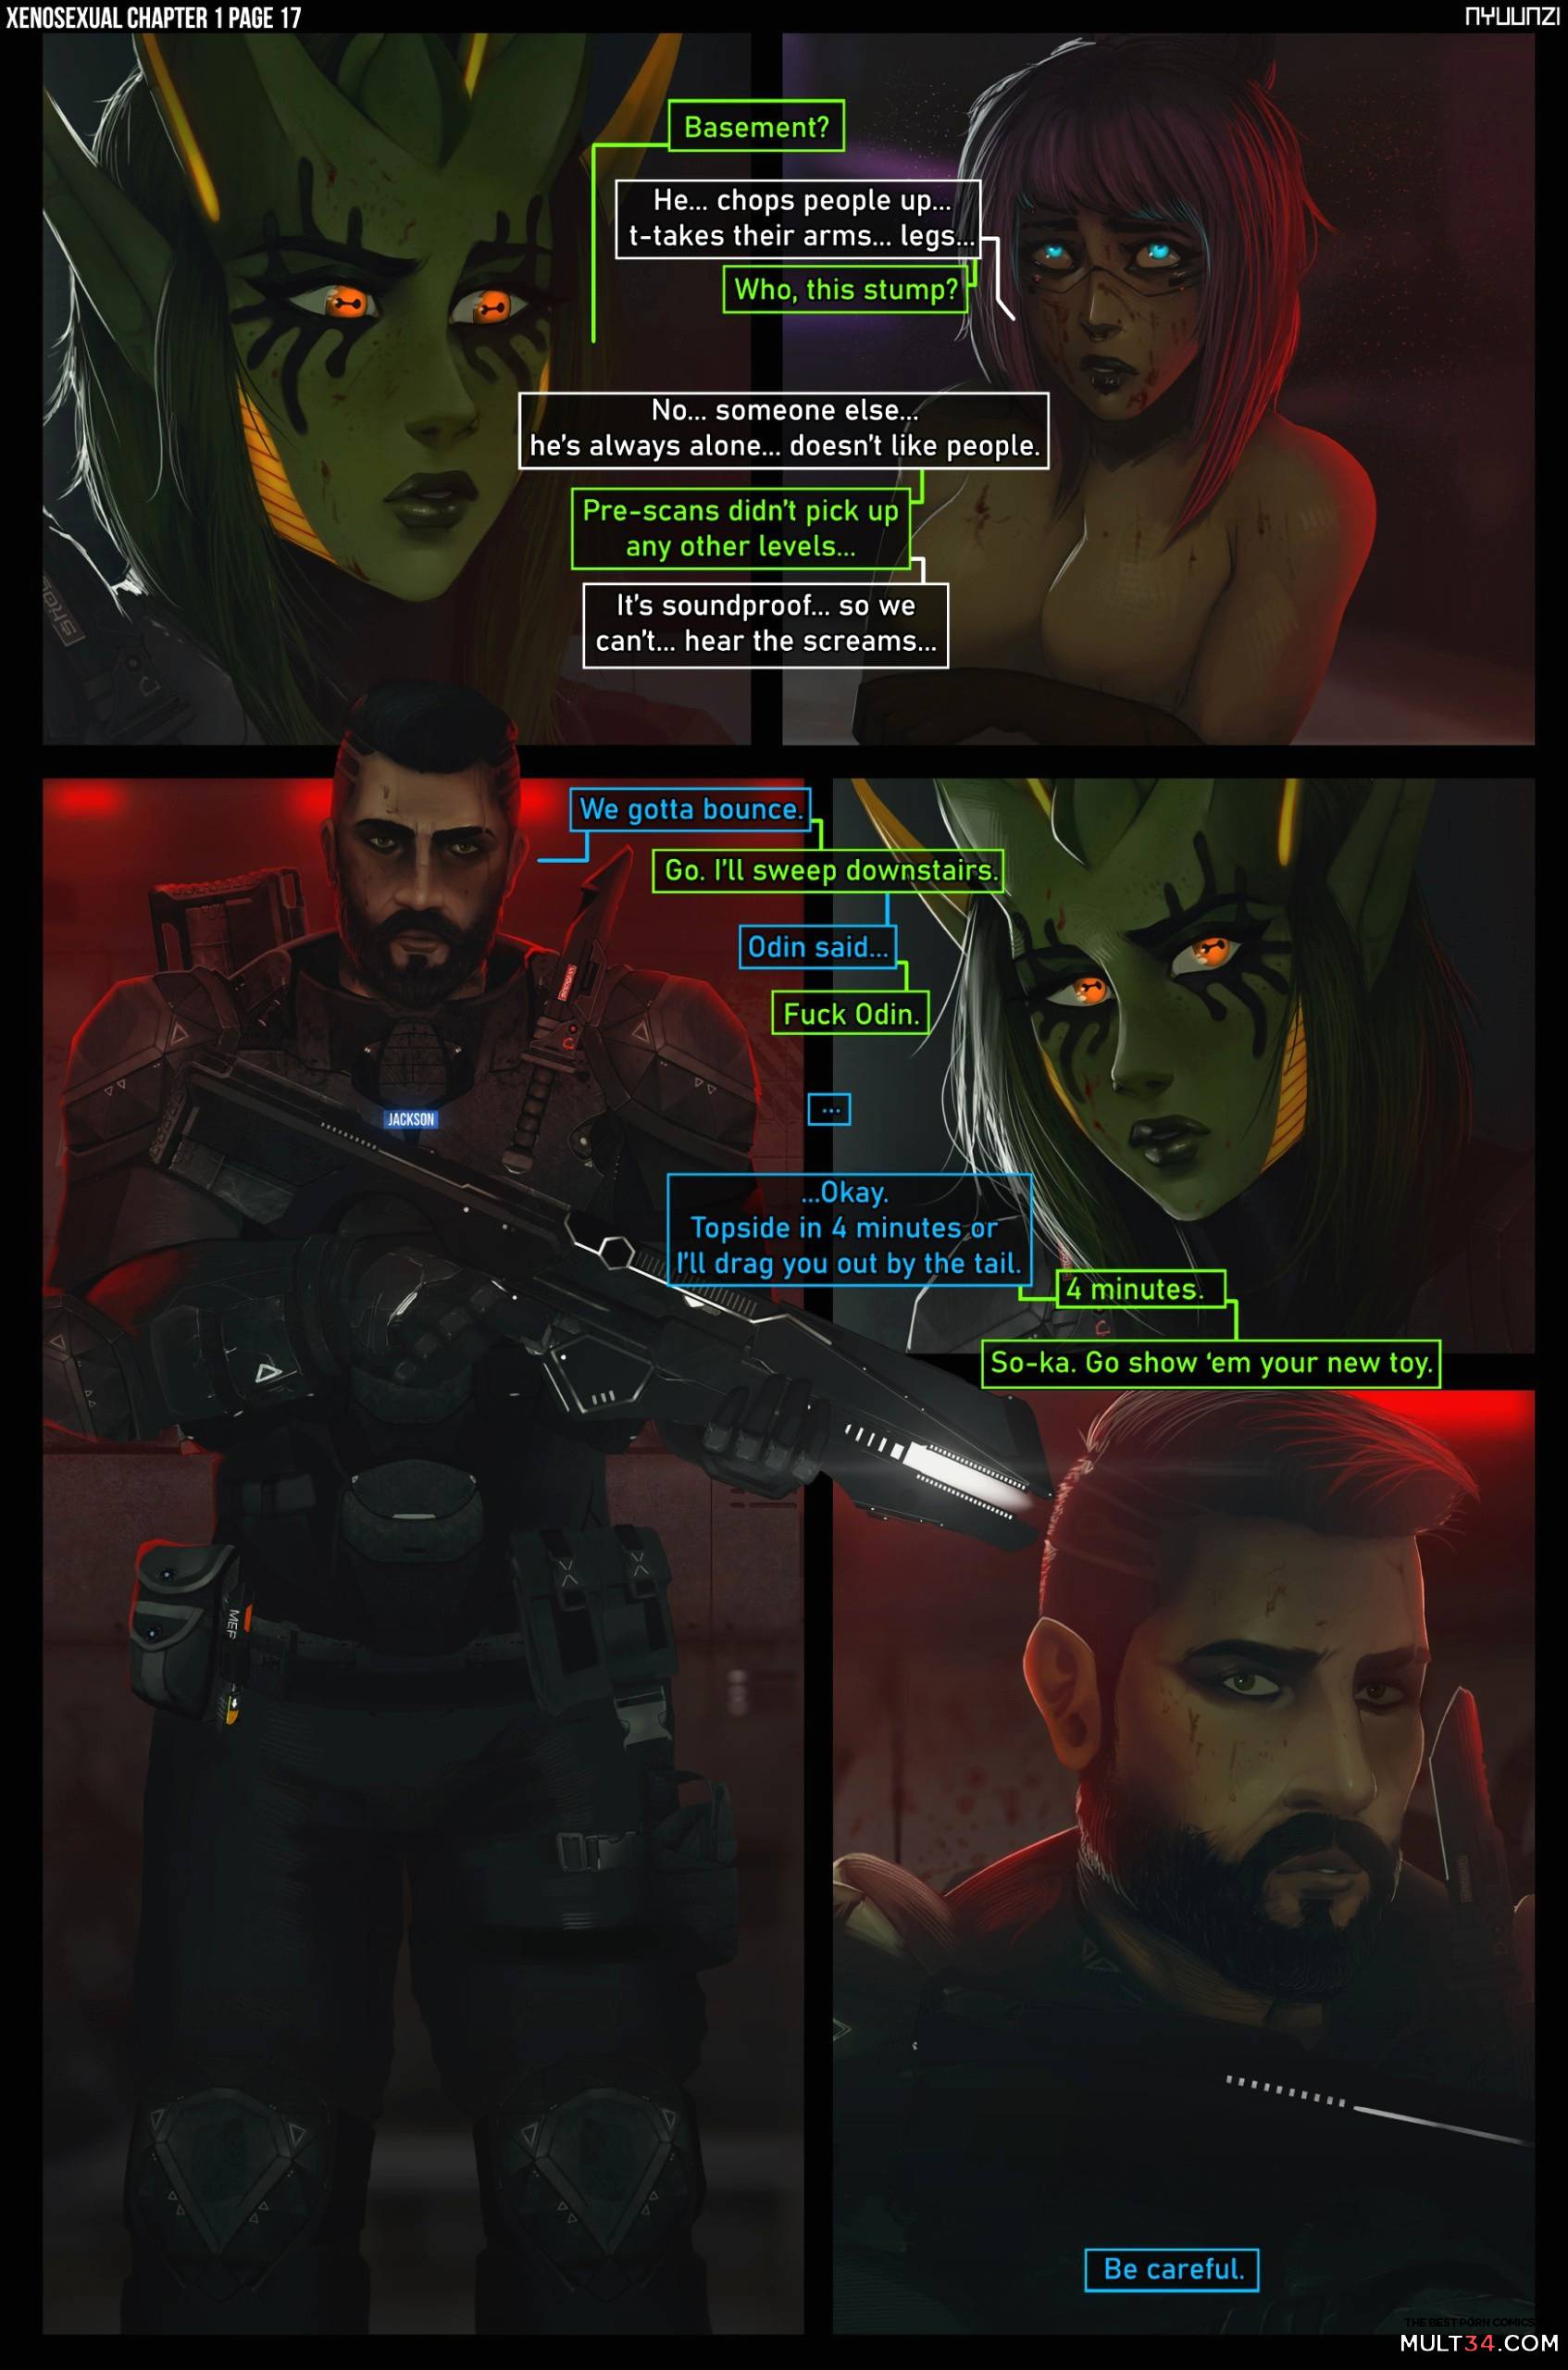 Xenosexual (Reboot) page 19